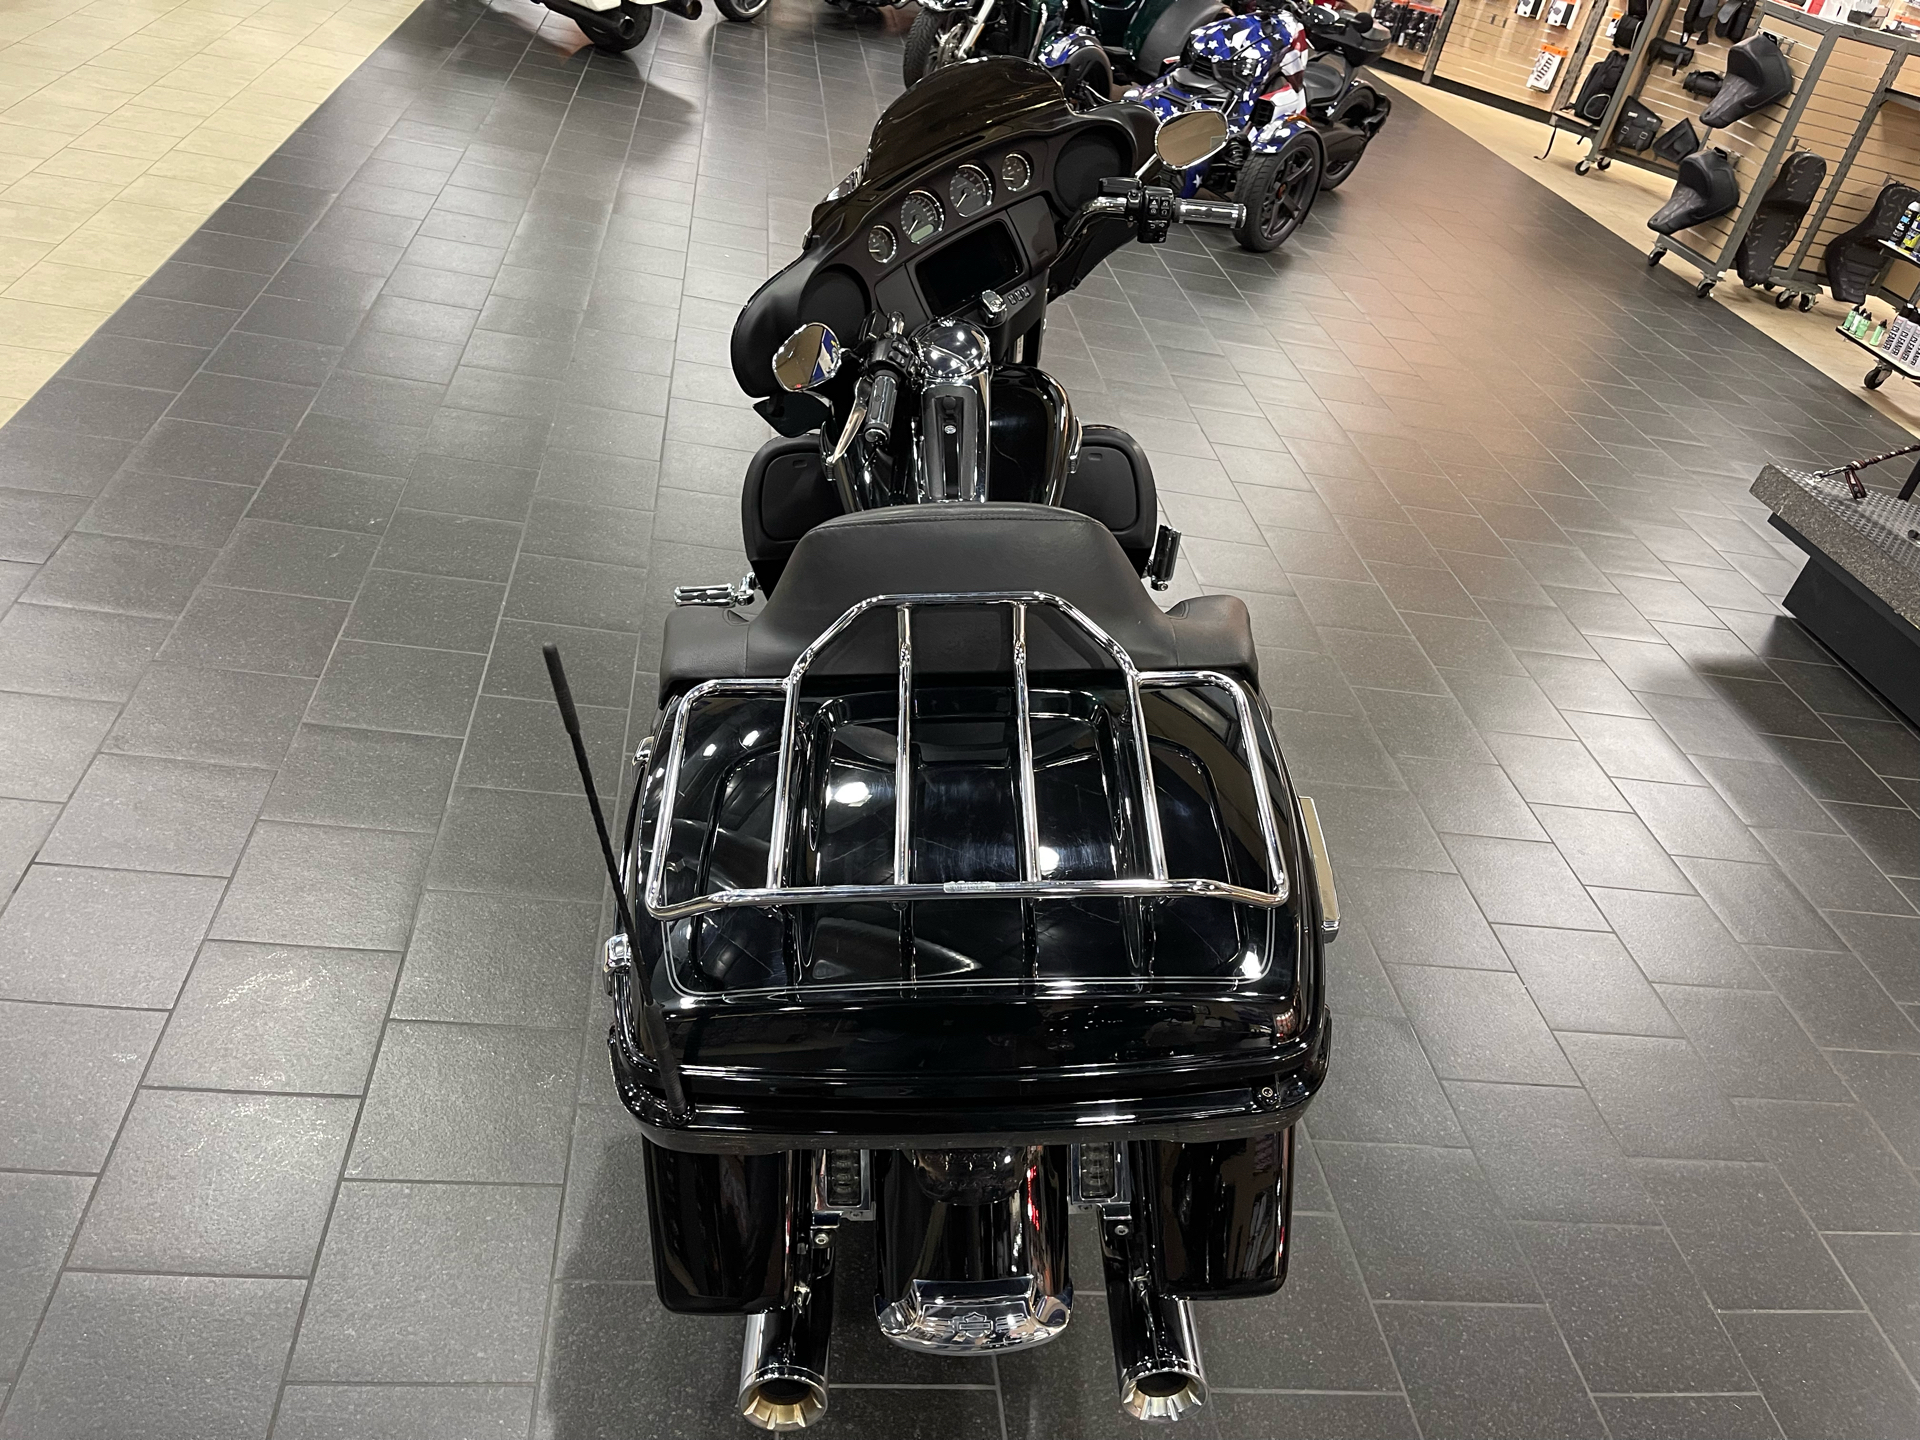 2019 Harley-Davidson Electra Glide® Ultra Classic® in The Woodlands, Texas - Photo 5